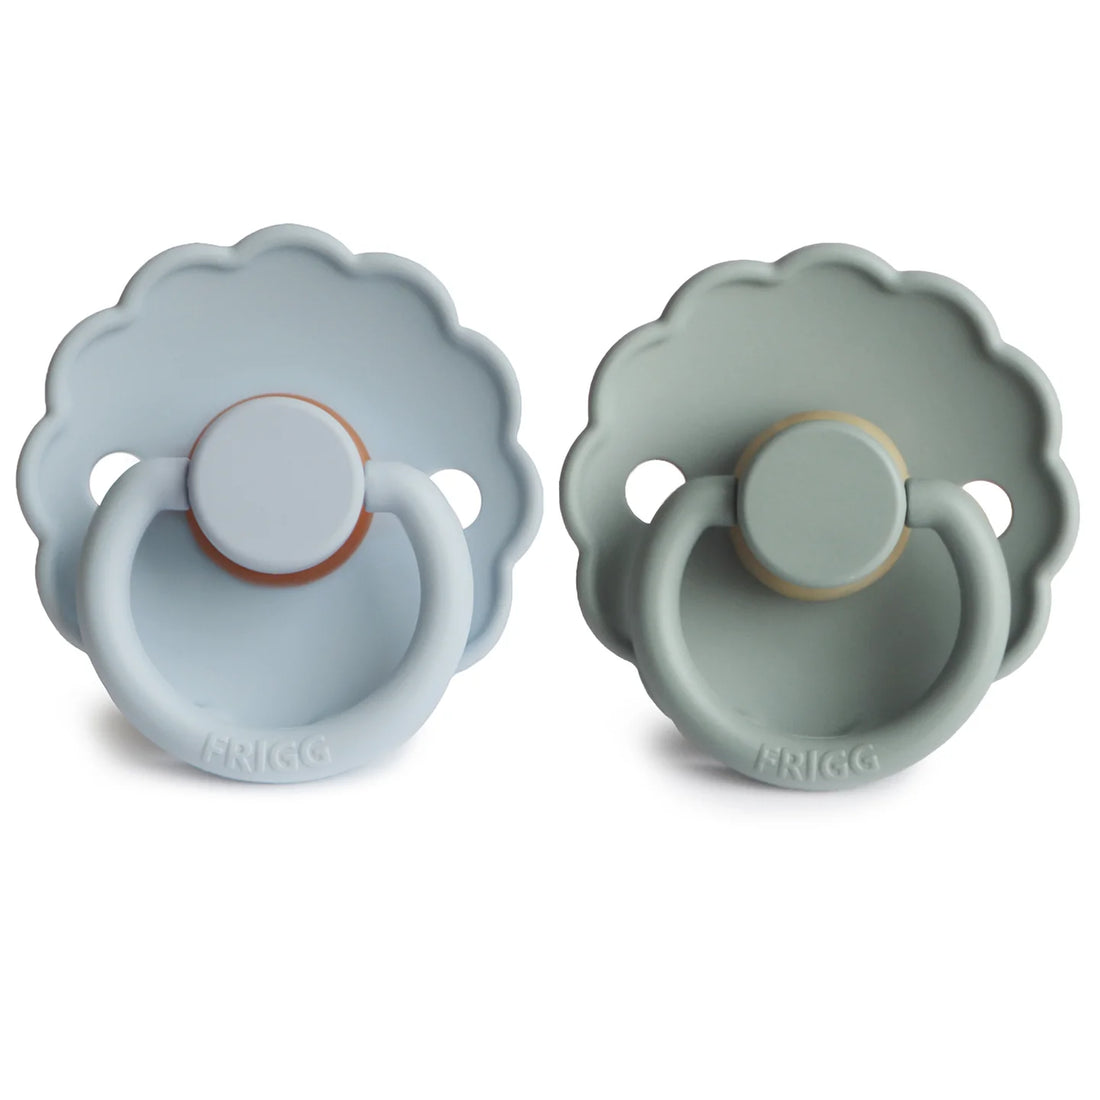 FRIGG DAISY NATURAL RUBBER PACIFIER | POWDER BLUE/SAGE | 2 PACK